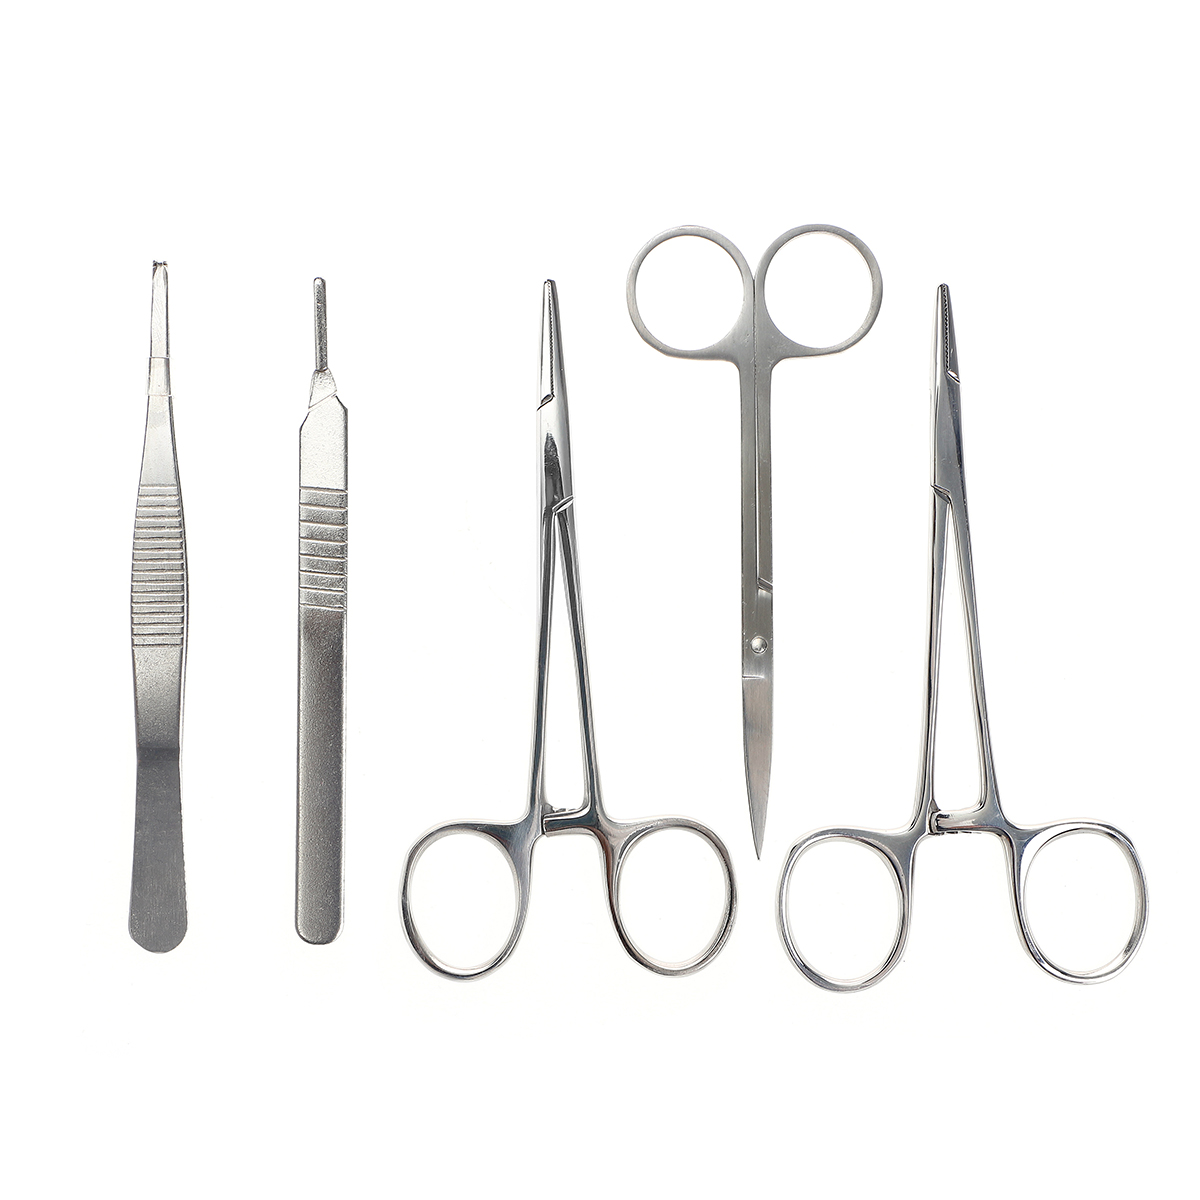 25-In-1-Skin-Suture-Surgical-Training-Kit-Silicone-Pad-Needle-Scissors-Tools-Kit-1417313-8